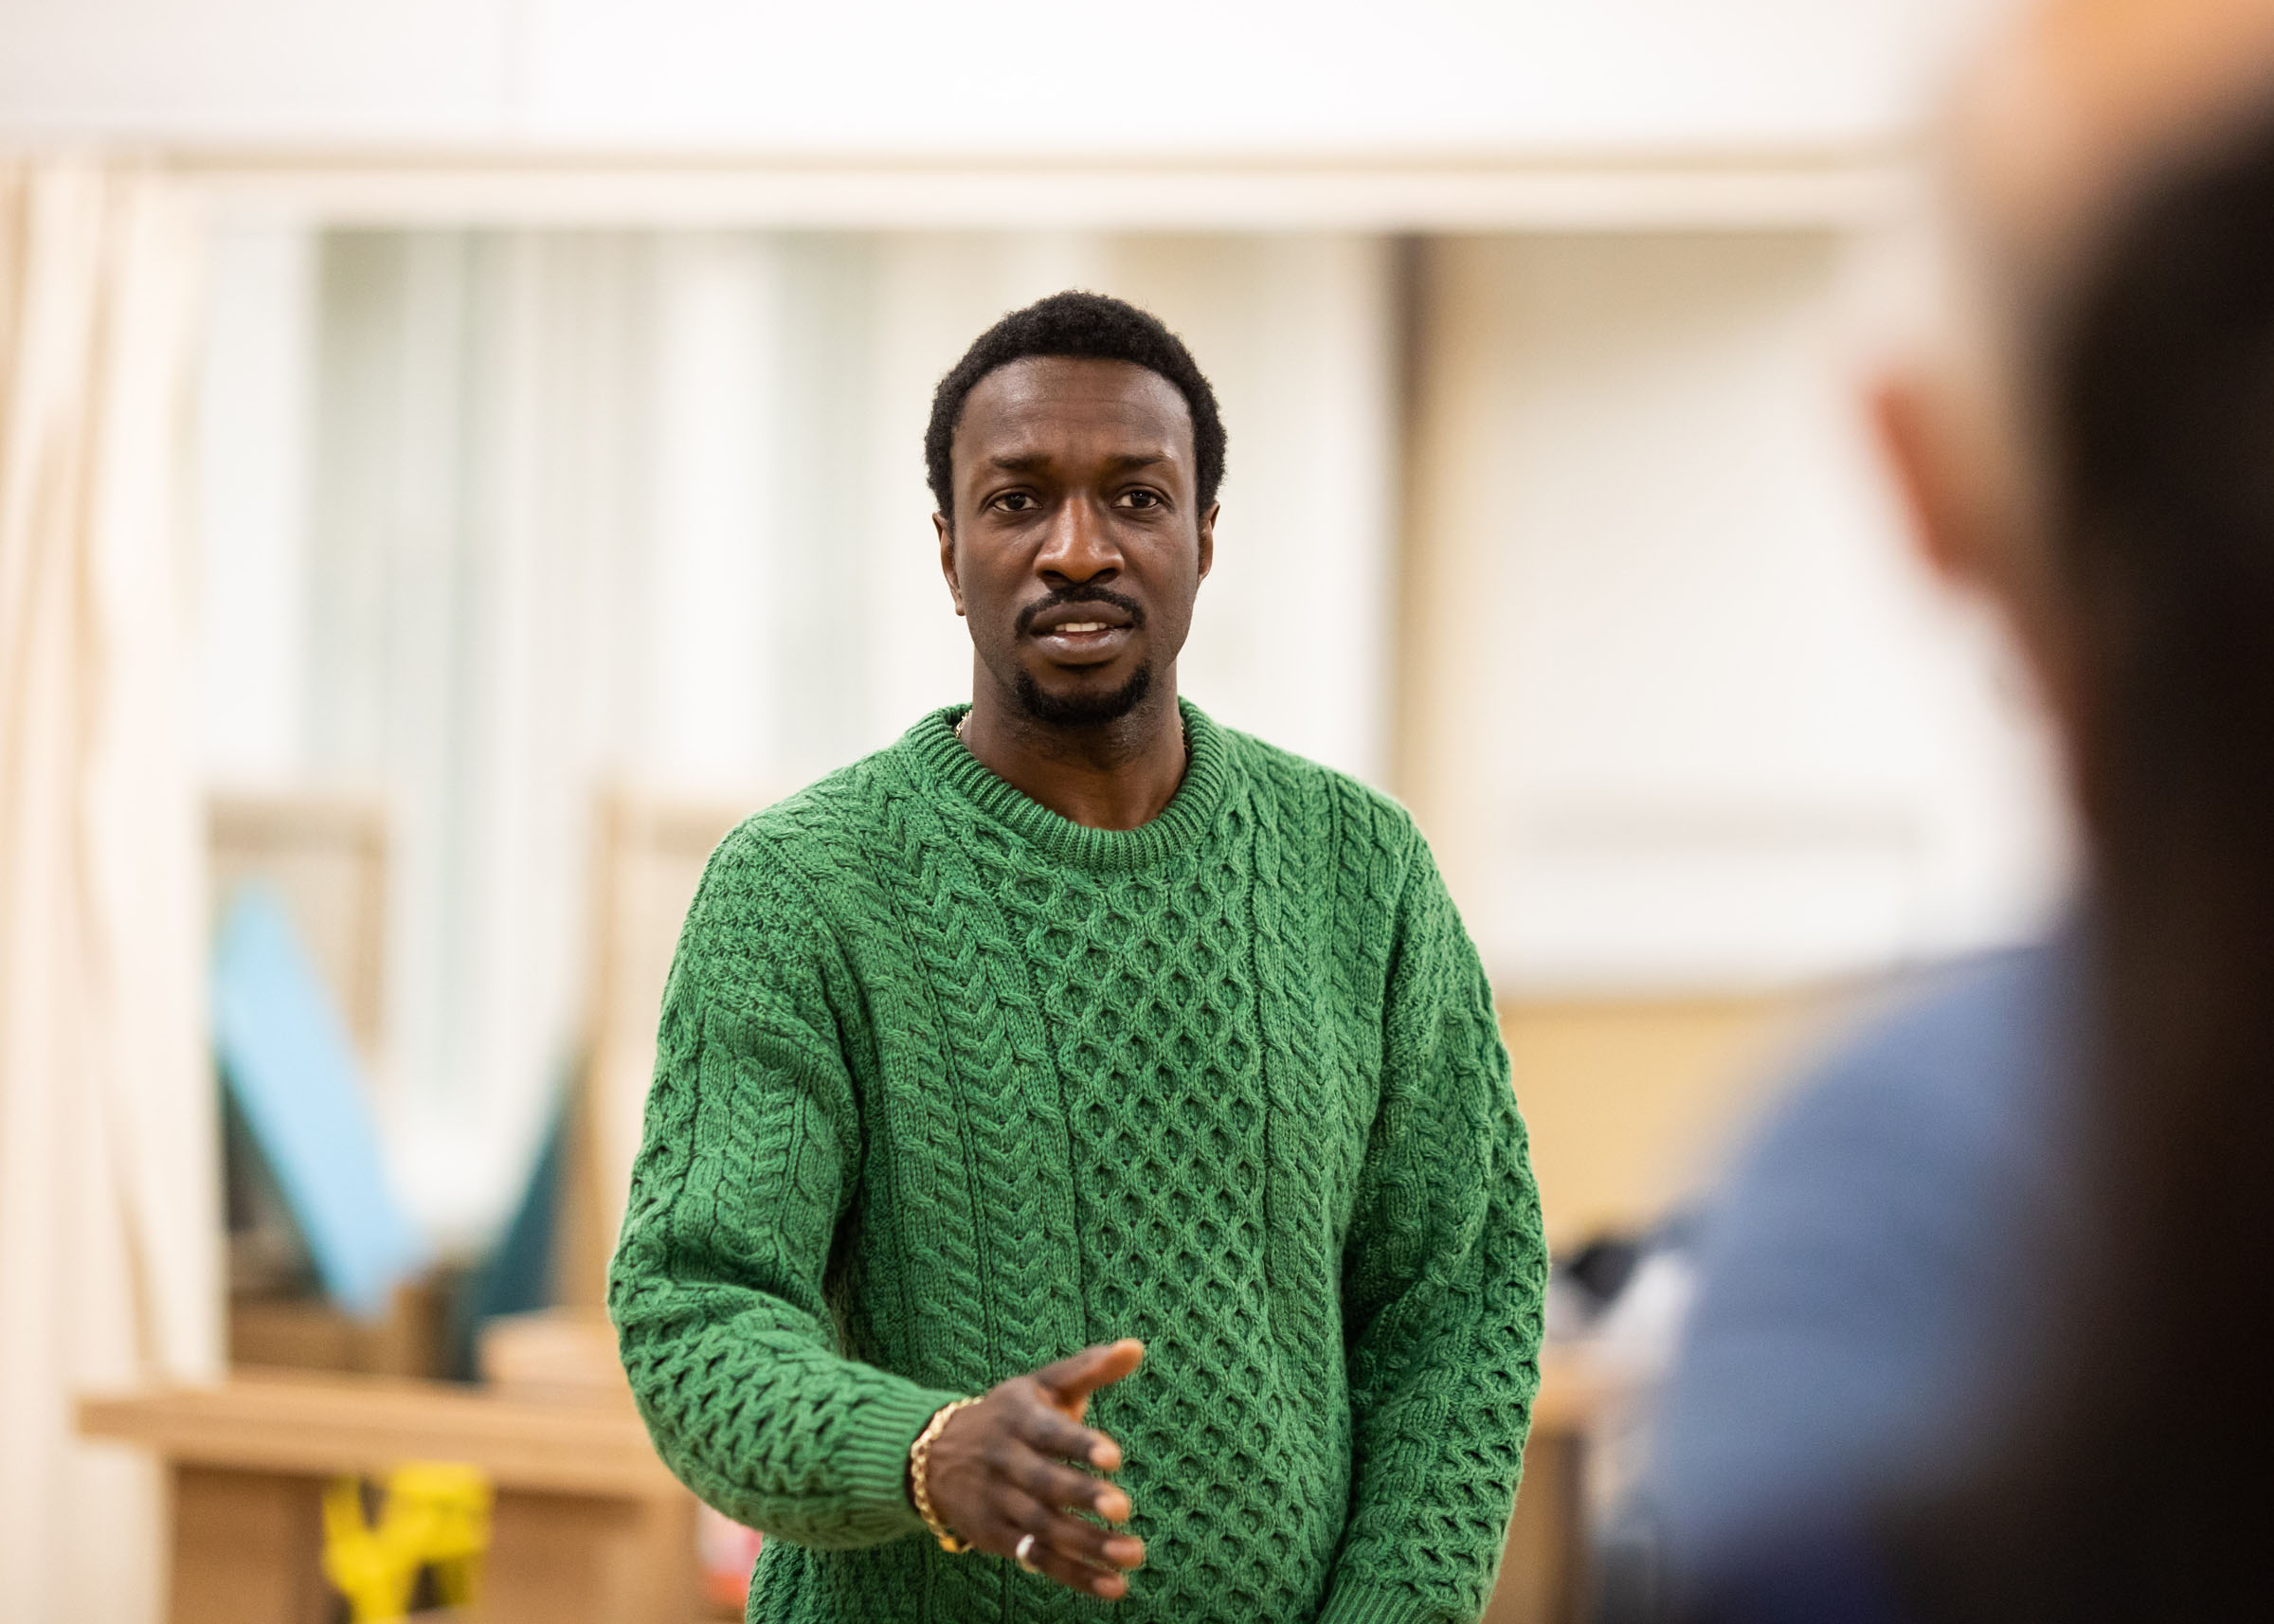 Zephryn Taitte rehearsing his role as Charles Arthur Brown in the play Bitter Wheat